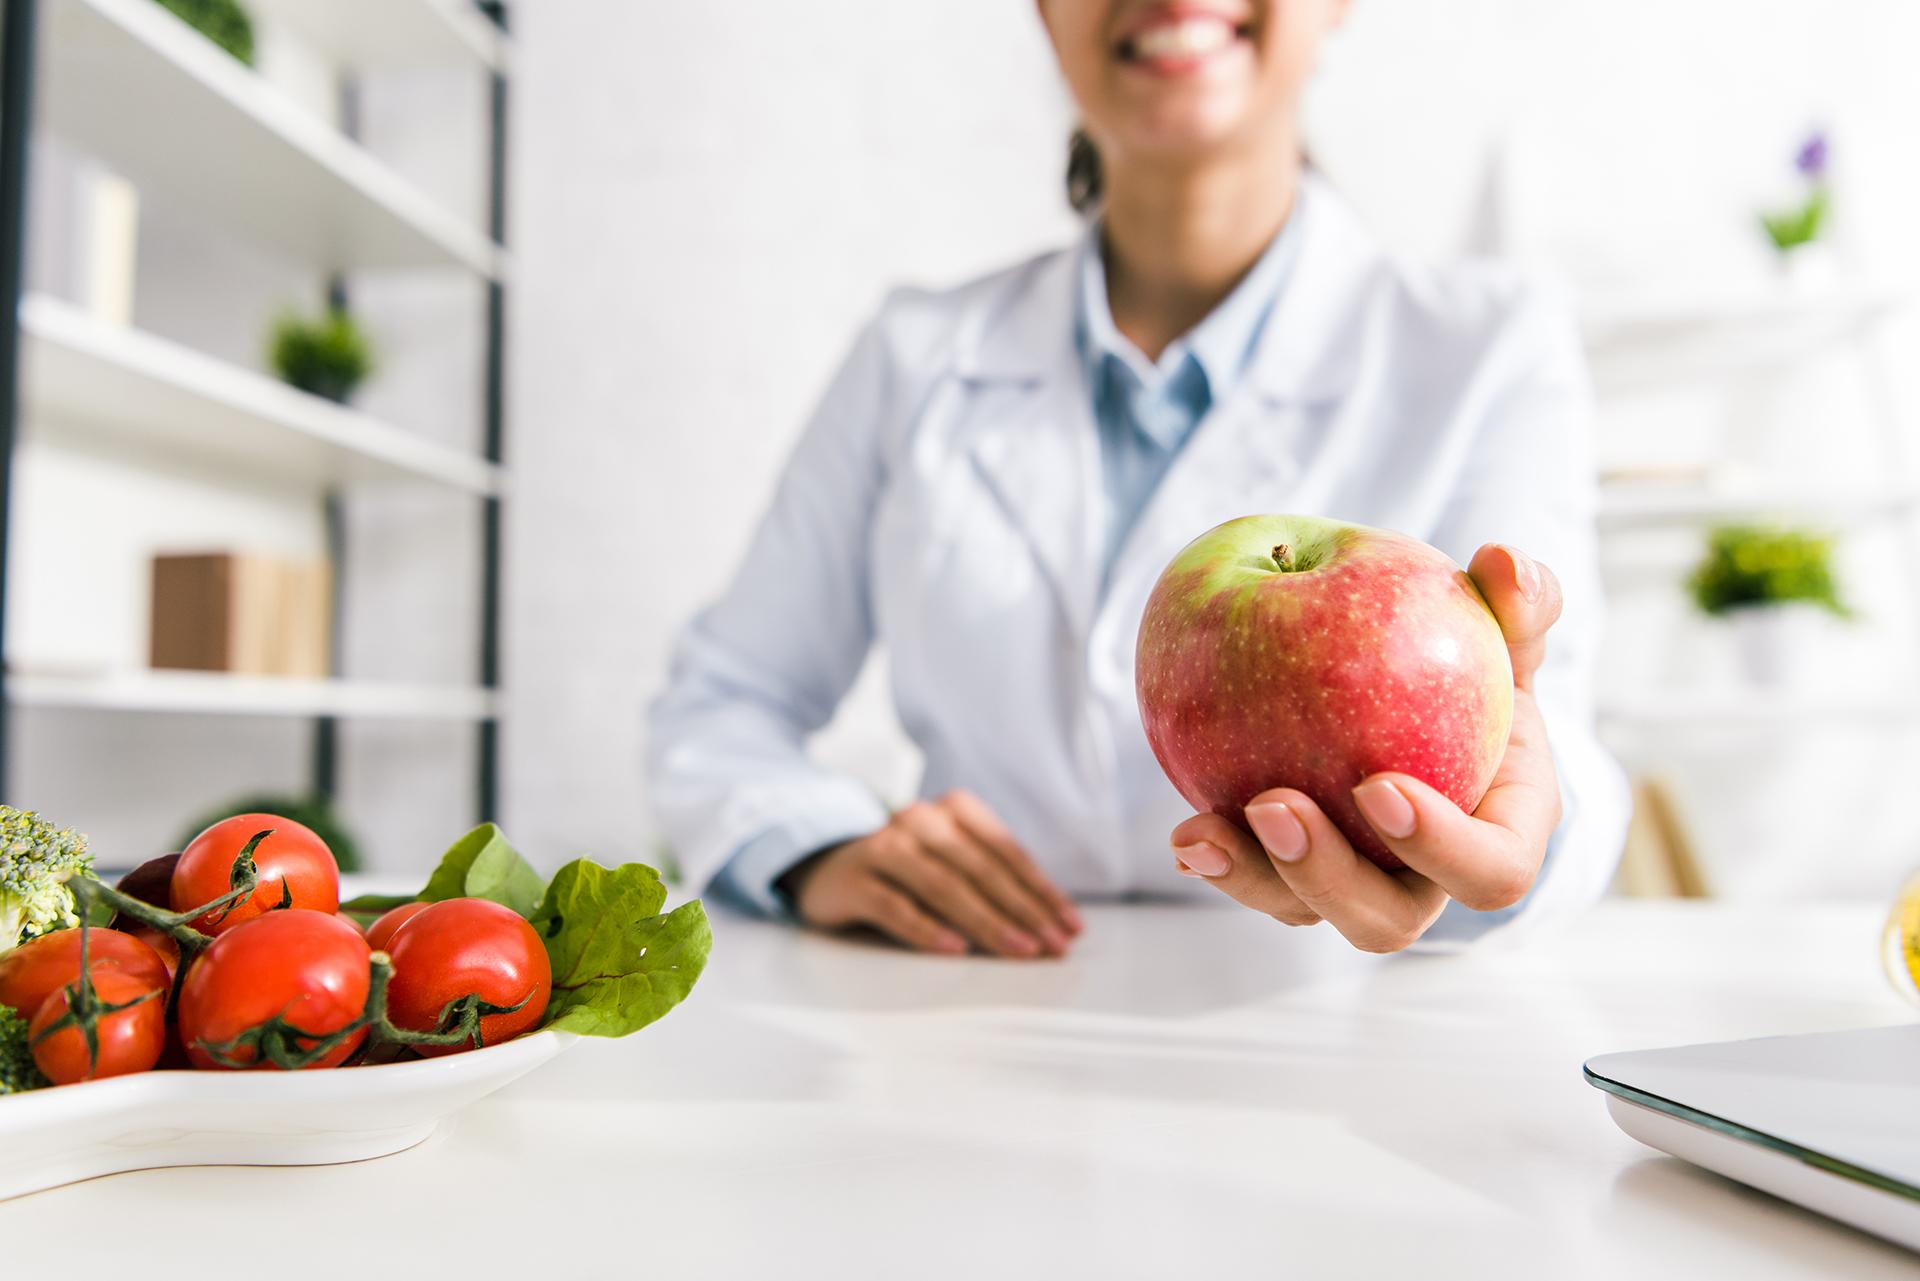 5 Important Roles a Nutritionist Plays in Your Daily Life